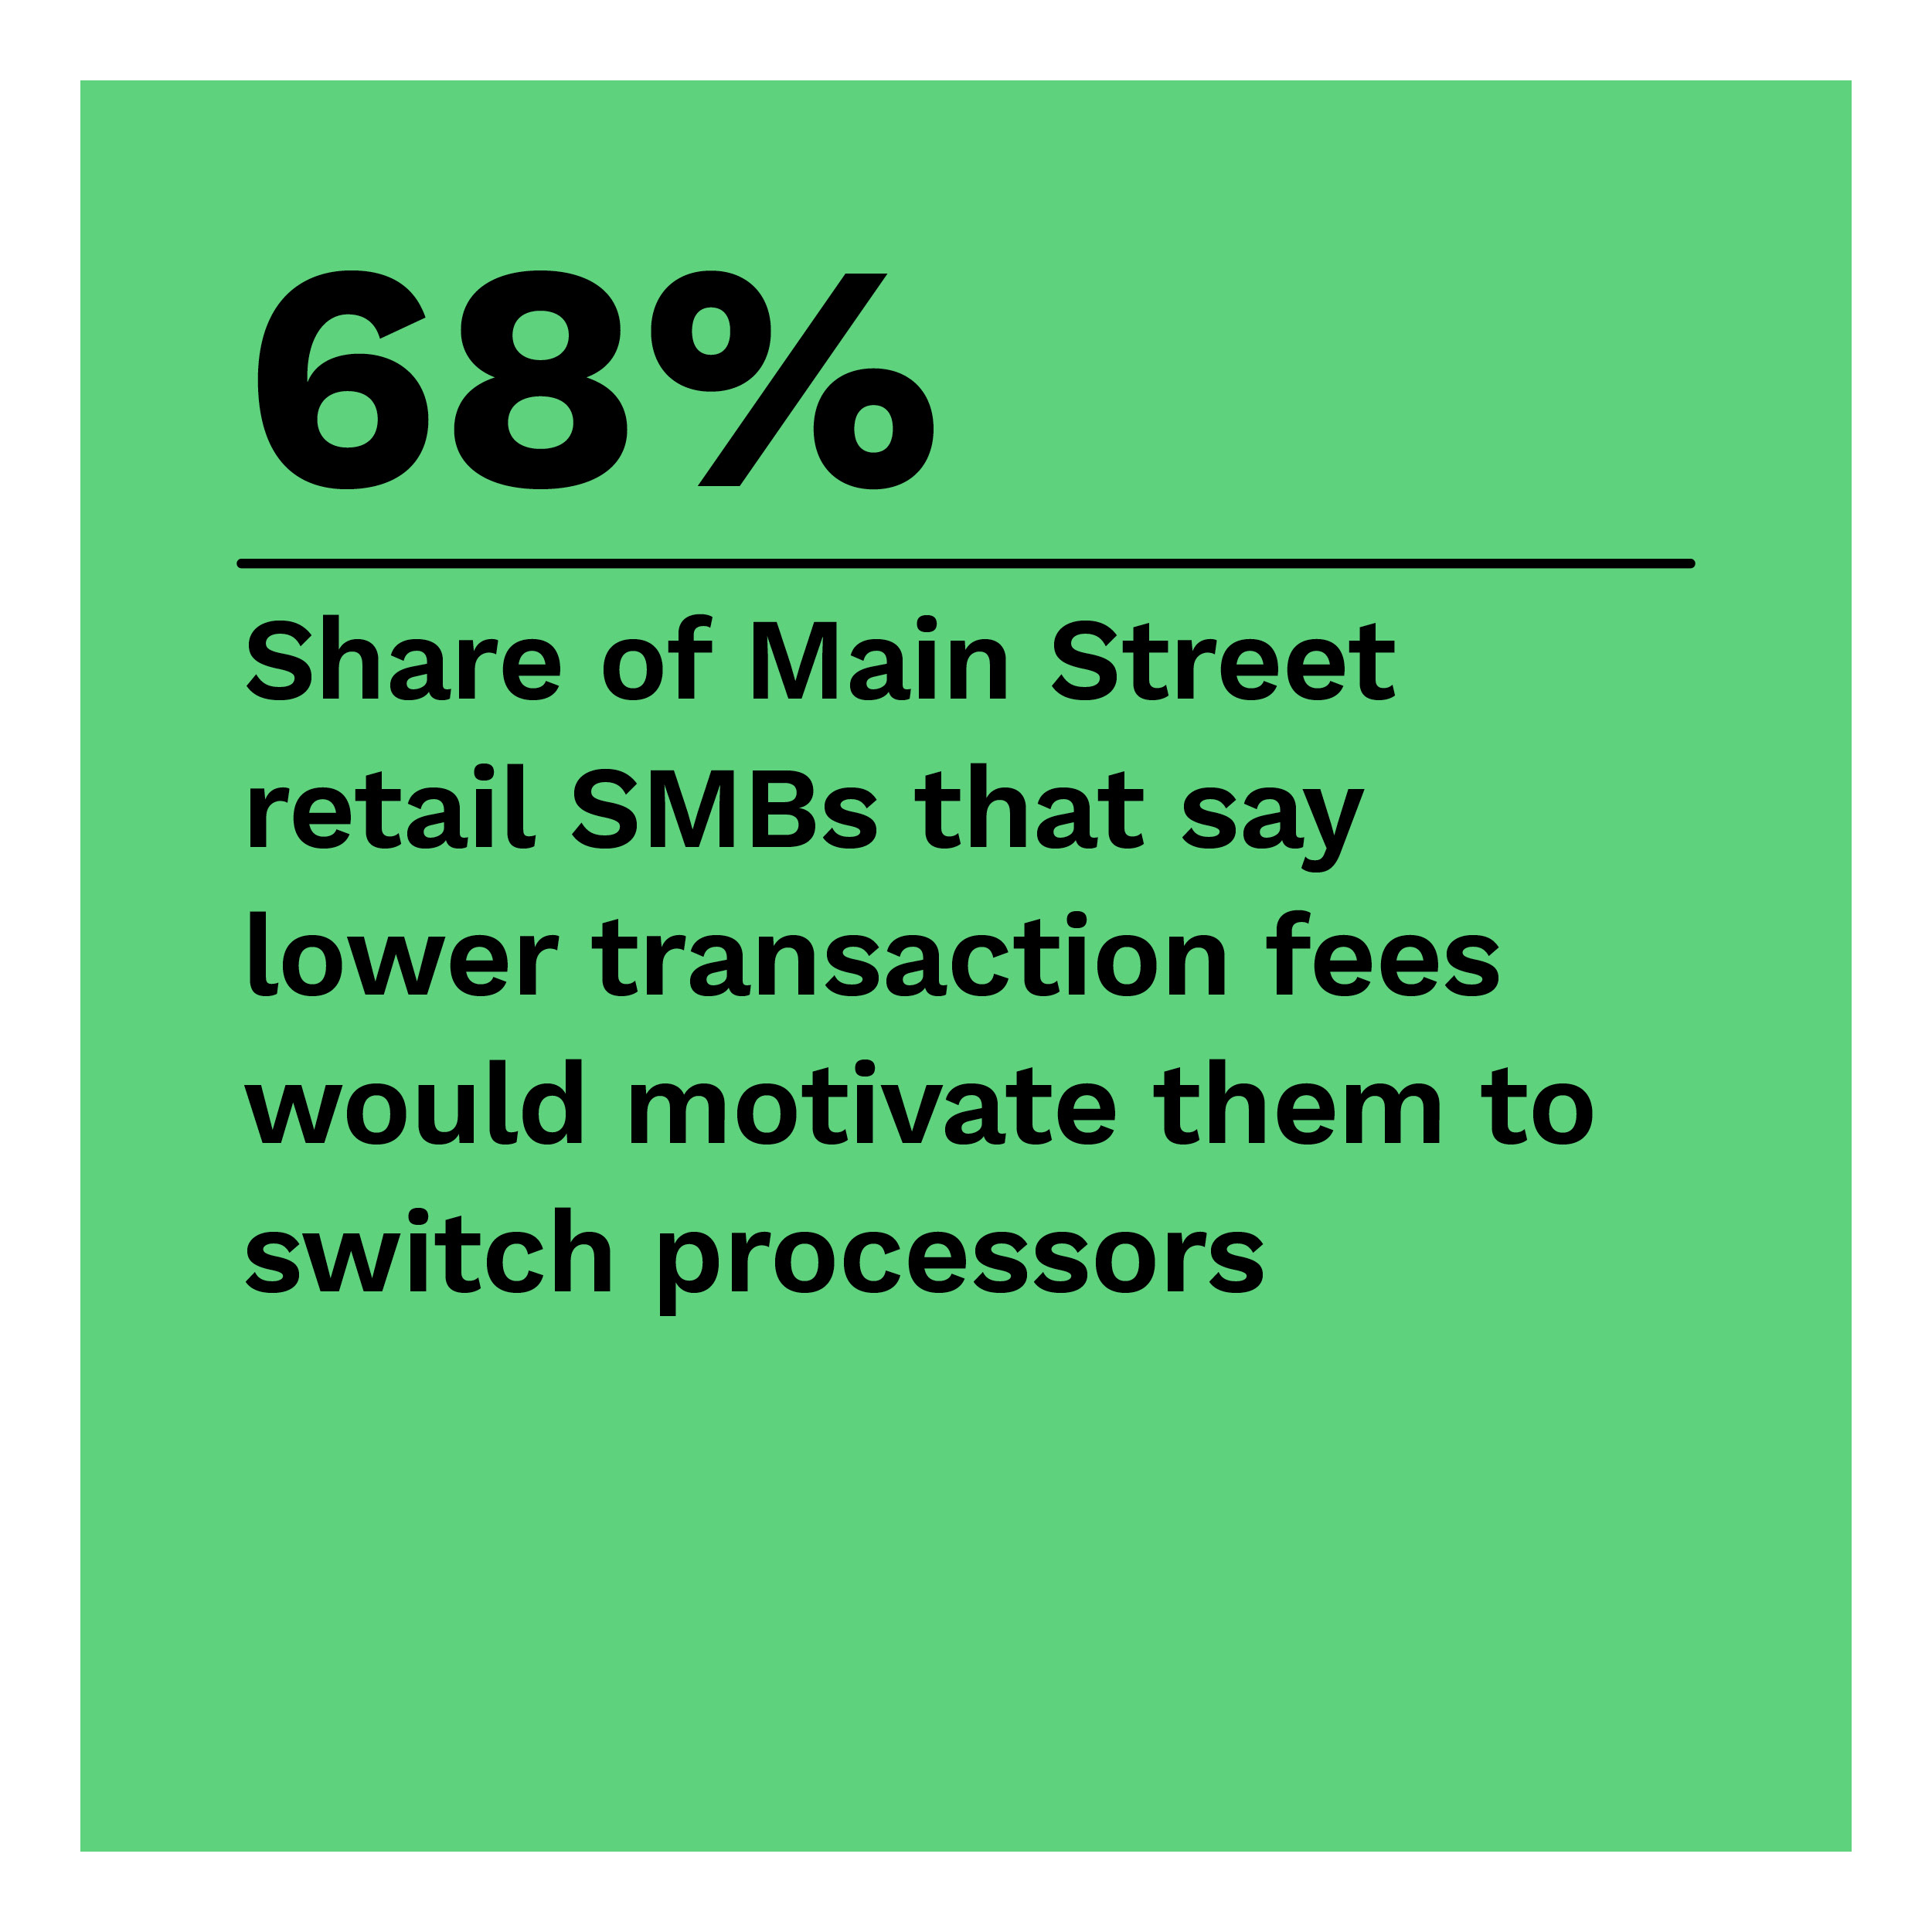 68%: Share of Main Street retail SMBs that say lower transaction fees would motivate them to switch processors